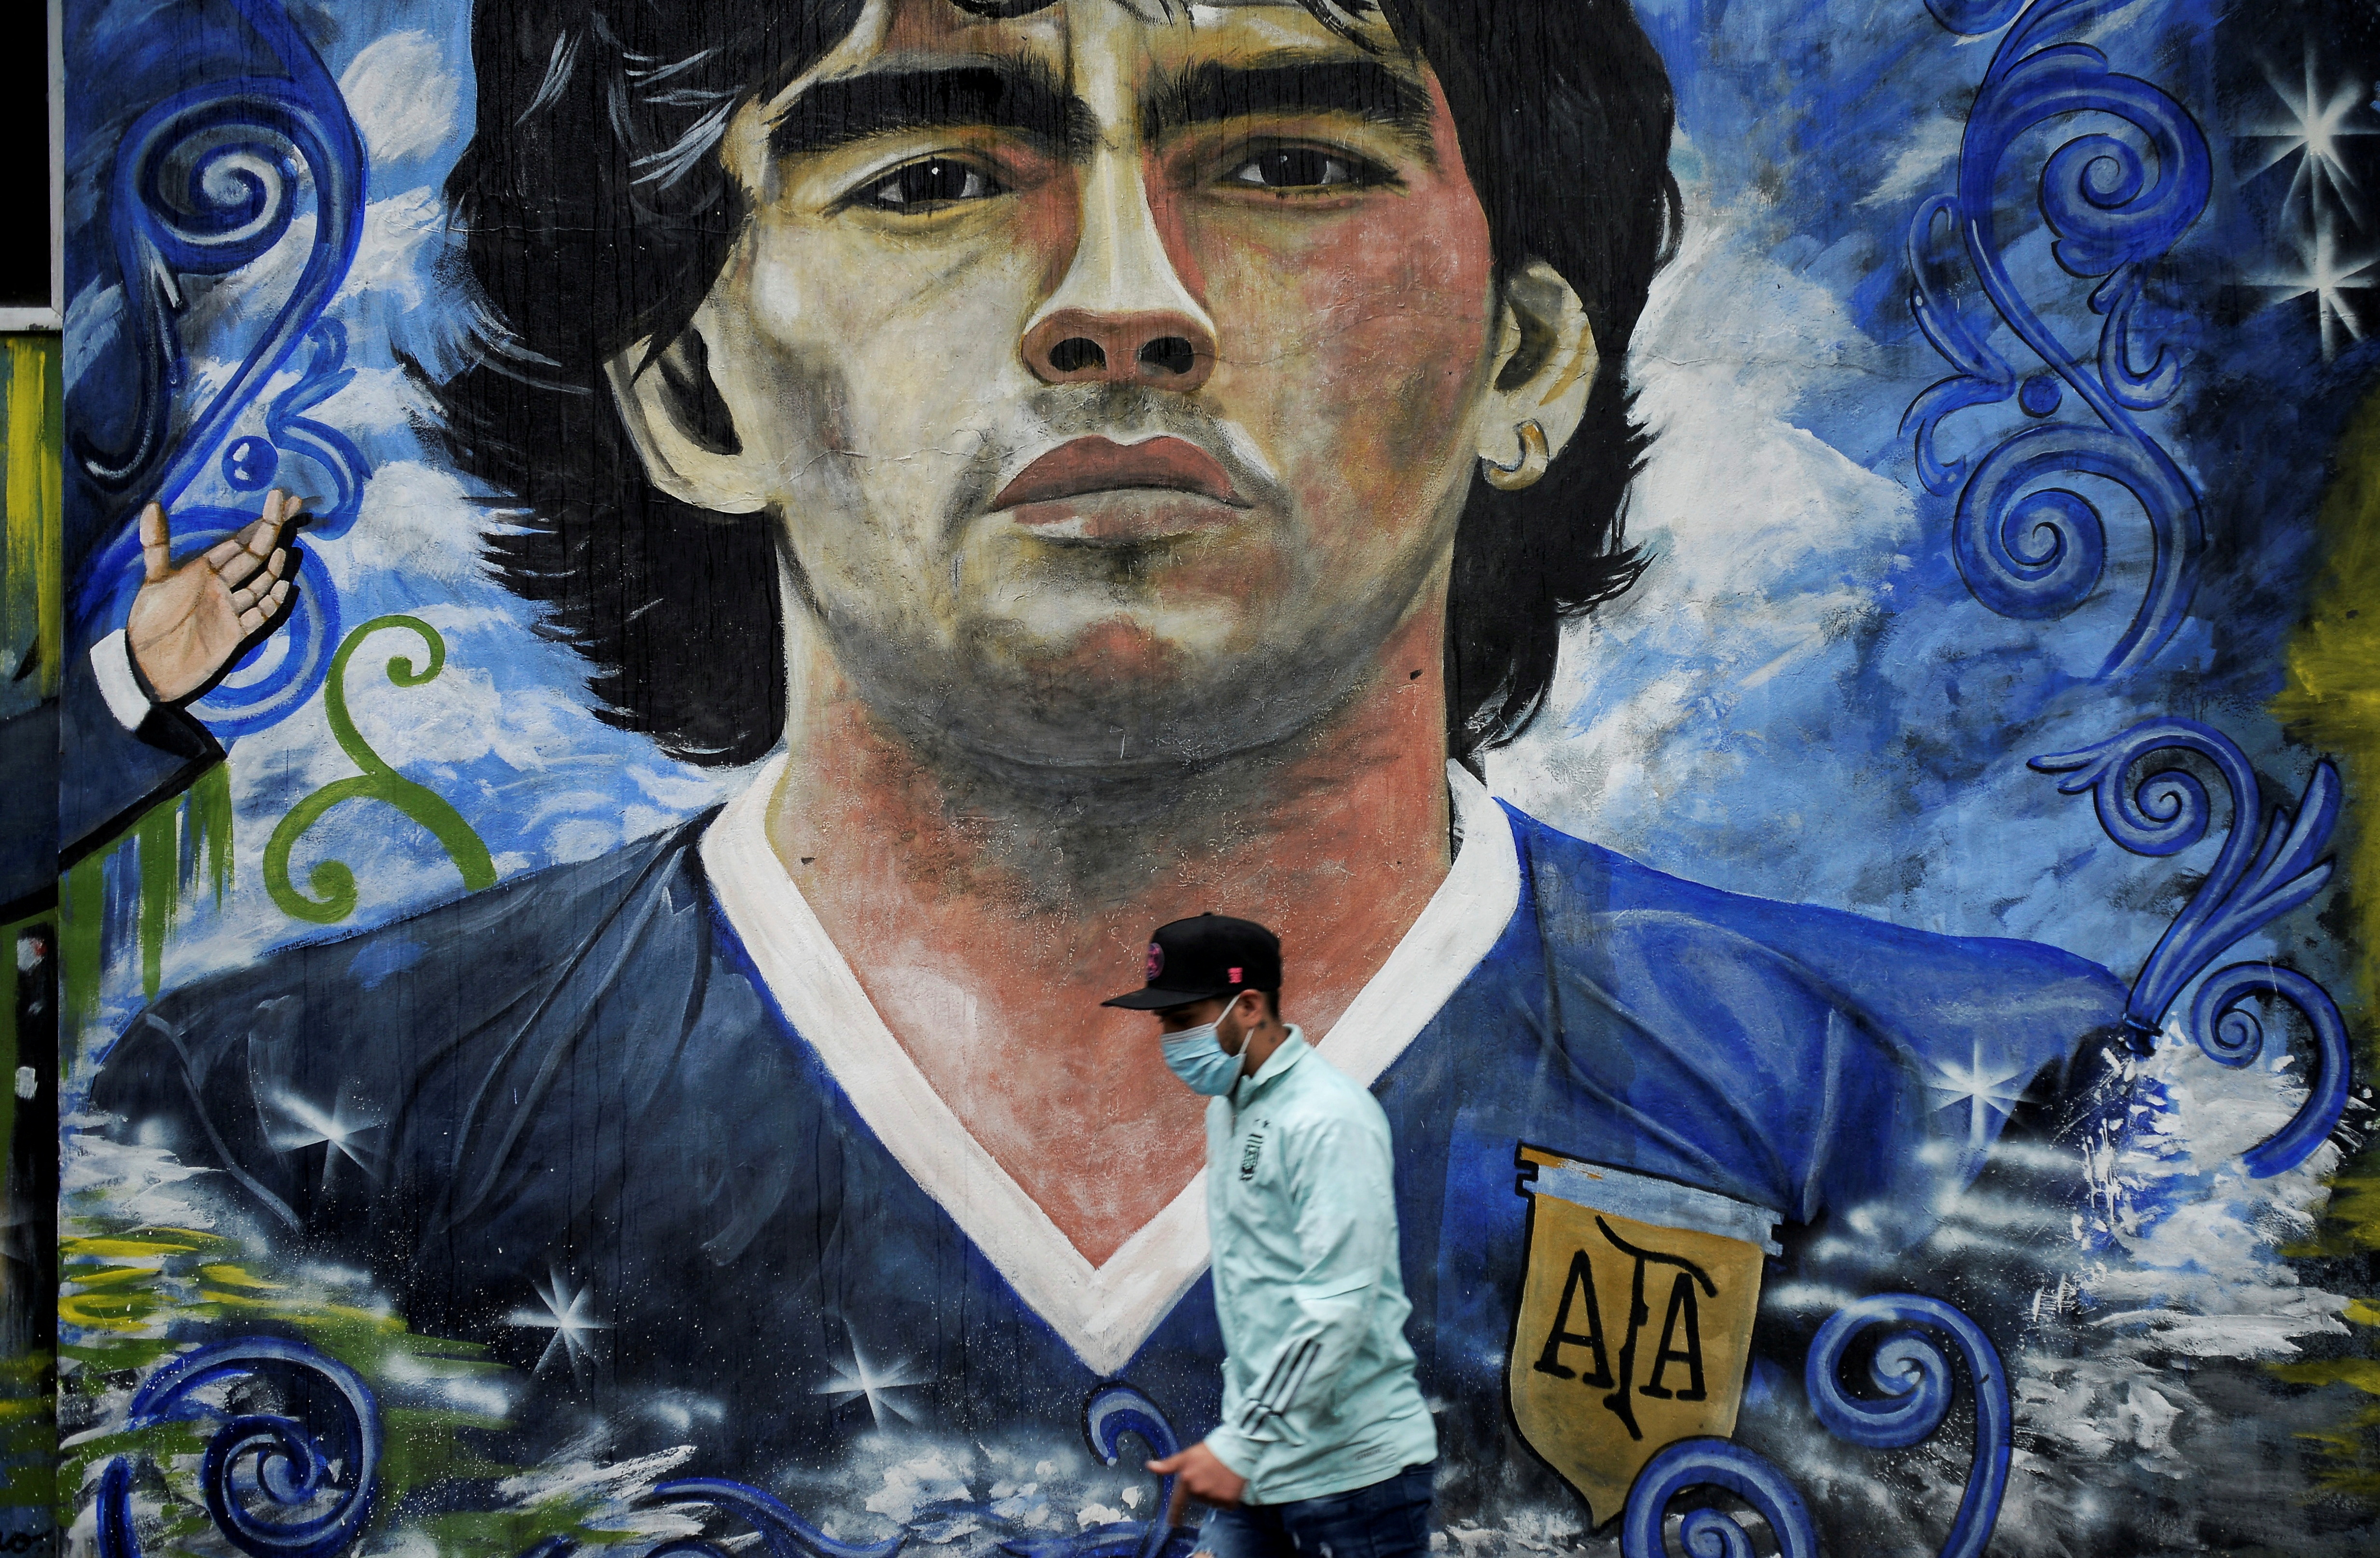 In the hands of God': what the papers say about the death of Diego